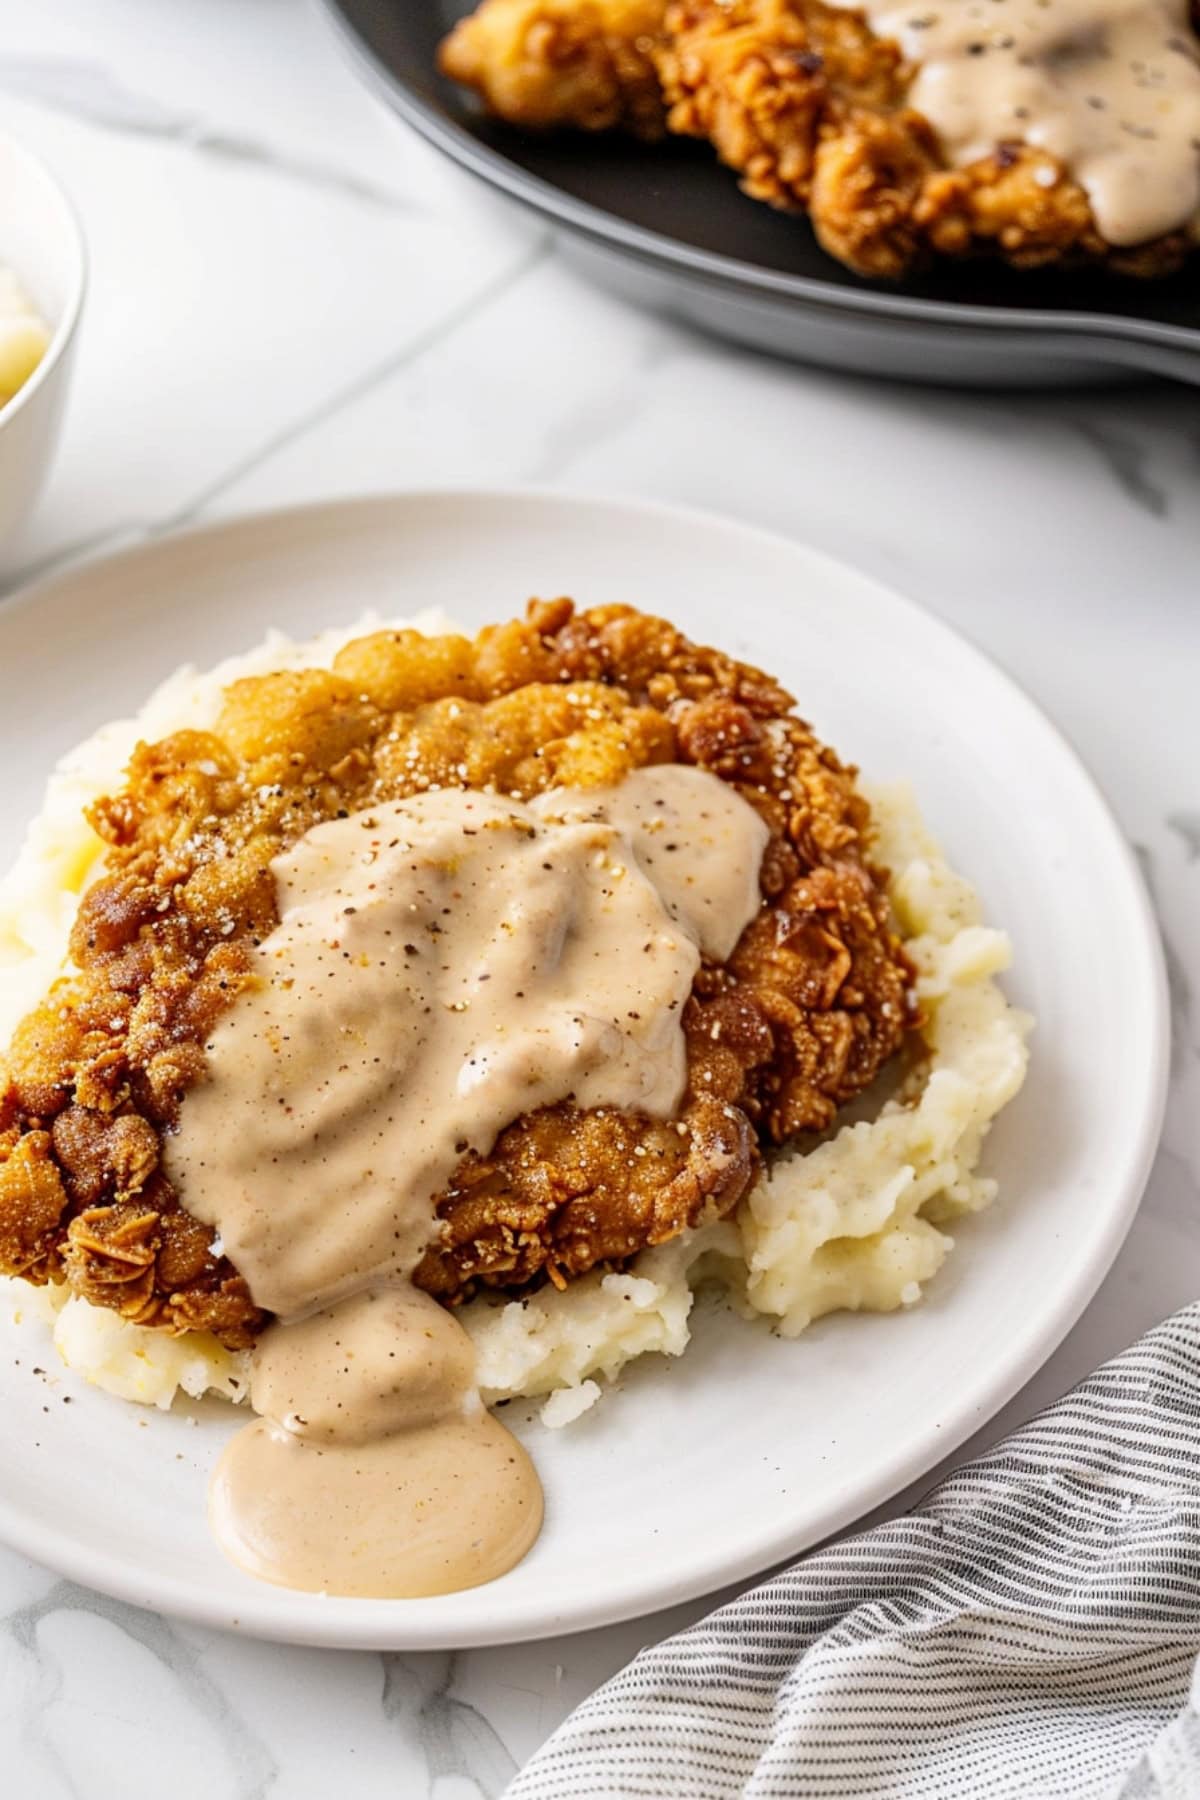 Homemade chicken fried steak with gravy in a bed of mashed potatoes.